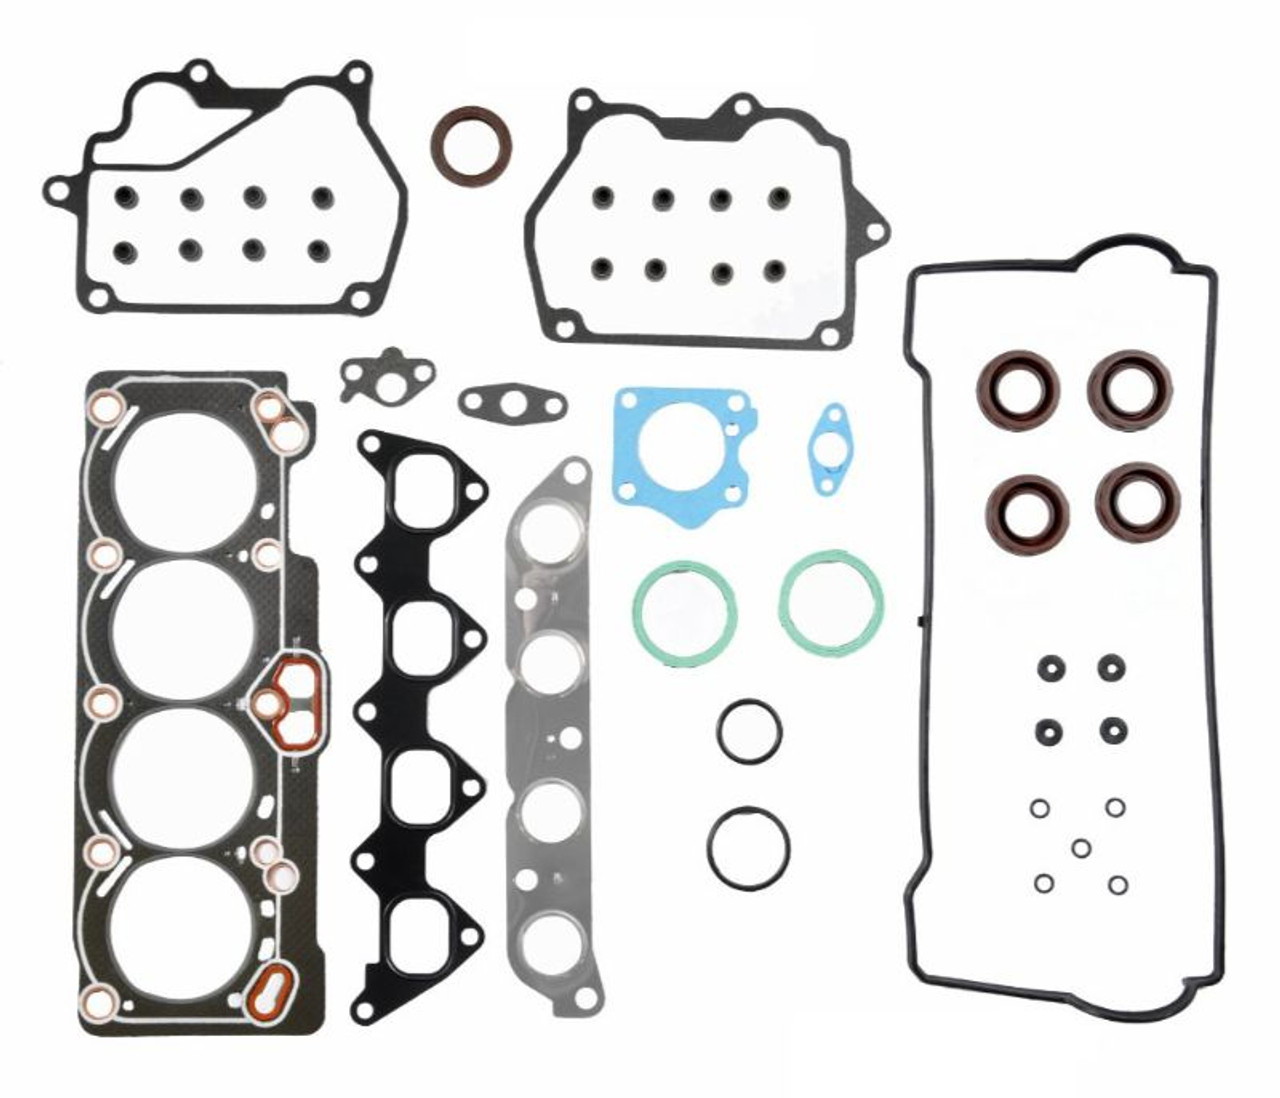 1993 Toyota Corolla 1.6L Engine Cylinder Head Gasket Set TO1.6HS-D -3